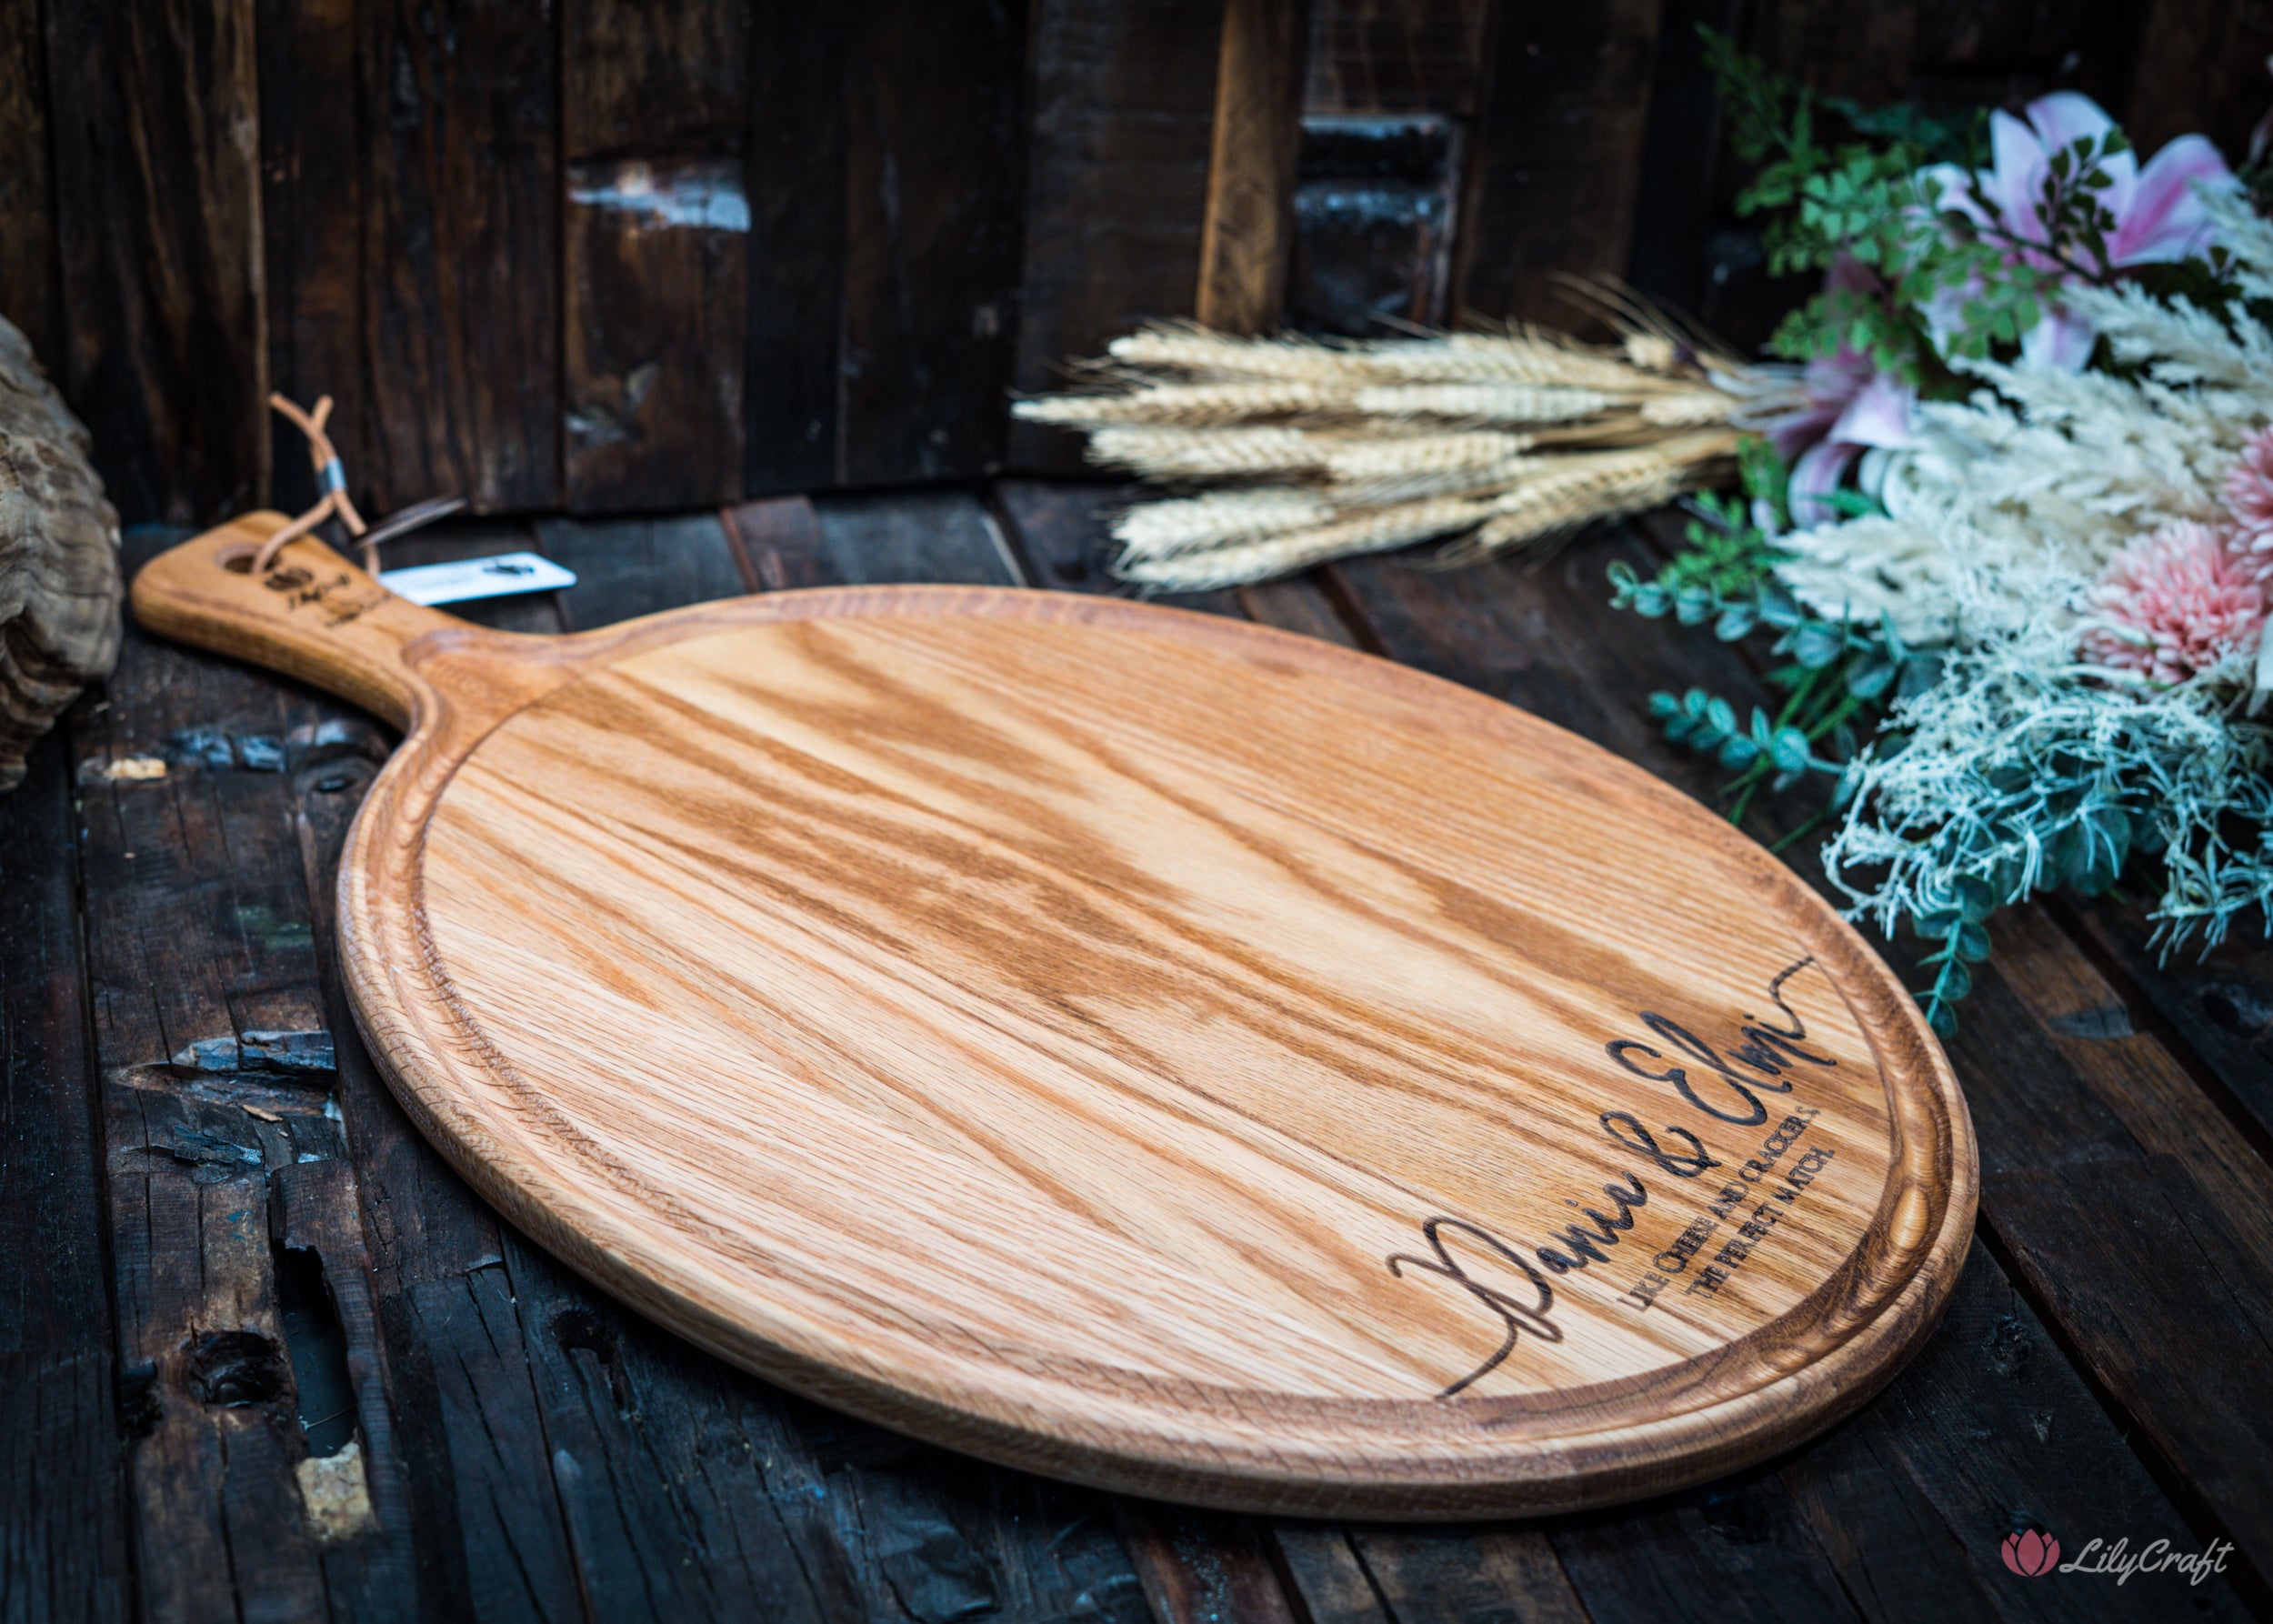 Elevate your dining experience with our elegant red oak cheese platter, designed for hosting memorable gatherings.